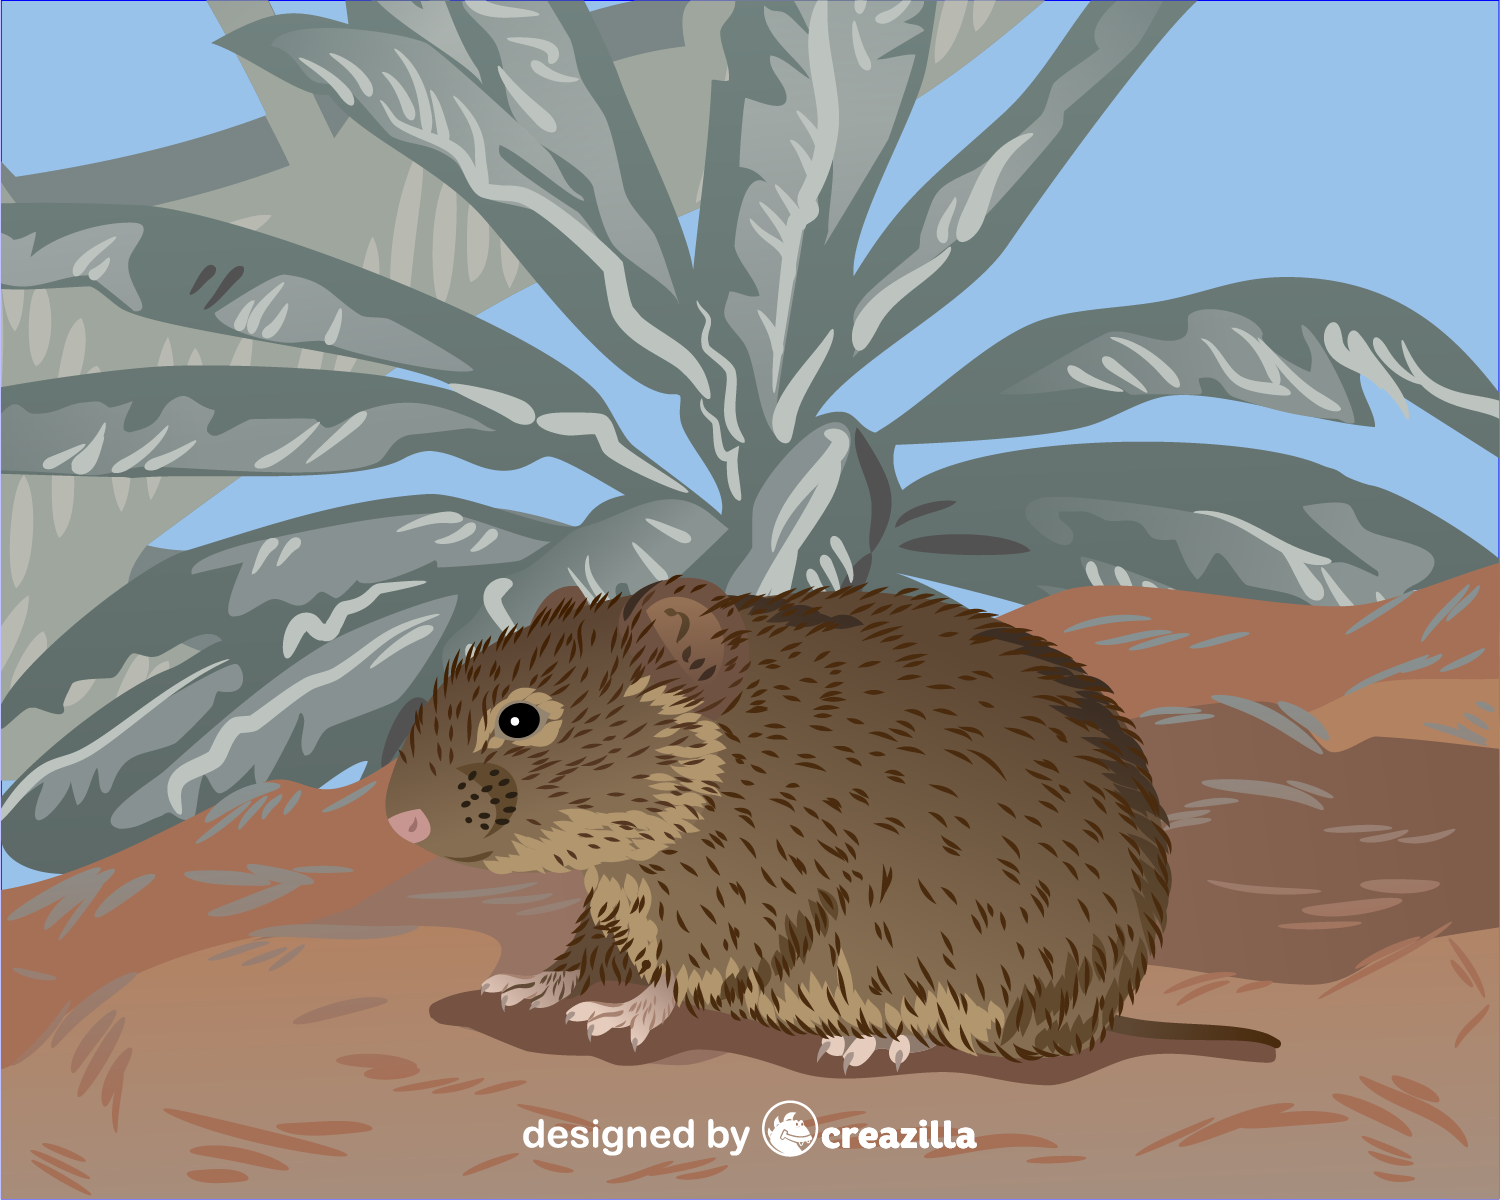 Prairie vole. This material is designed by Creazilla.com under Creative Commons Attribution 4.0 International (CC BY 4.0) license.